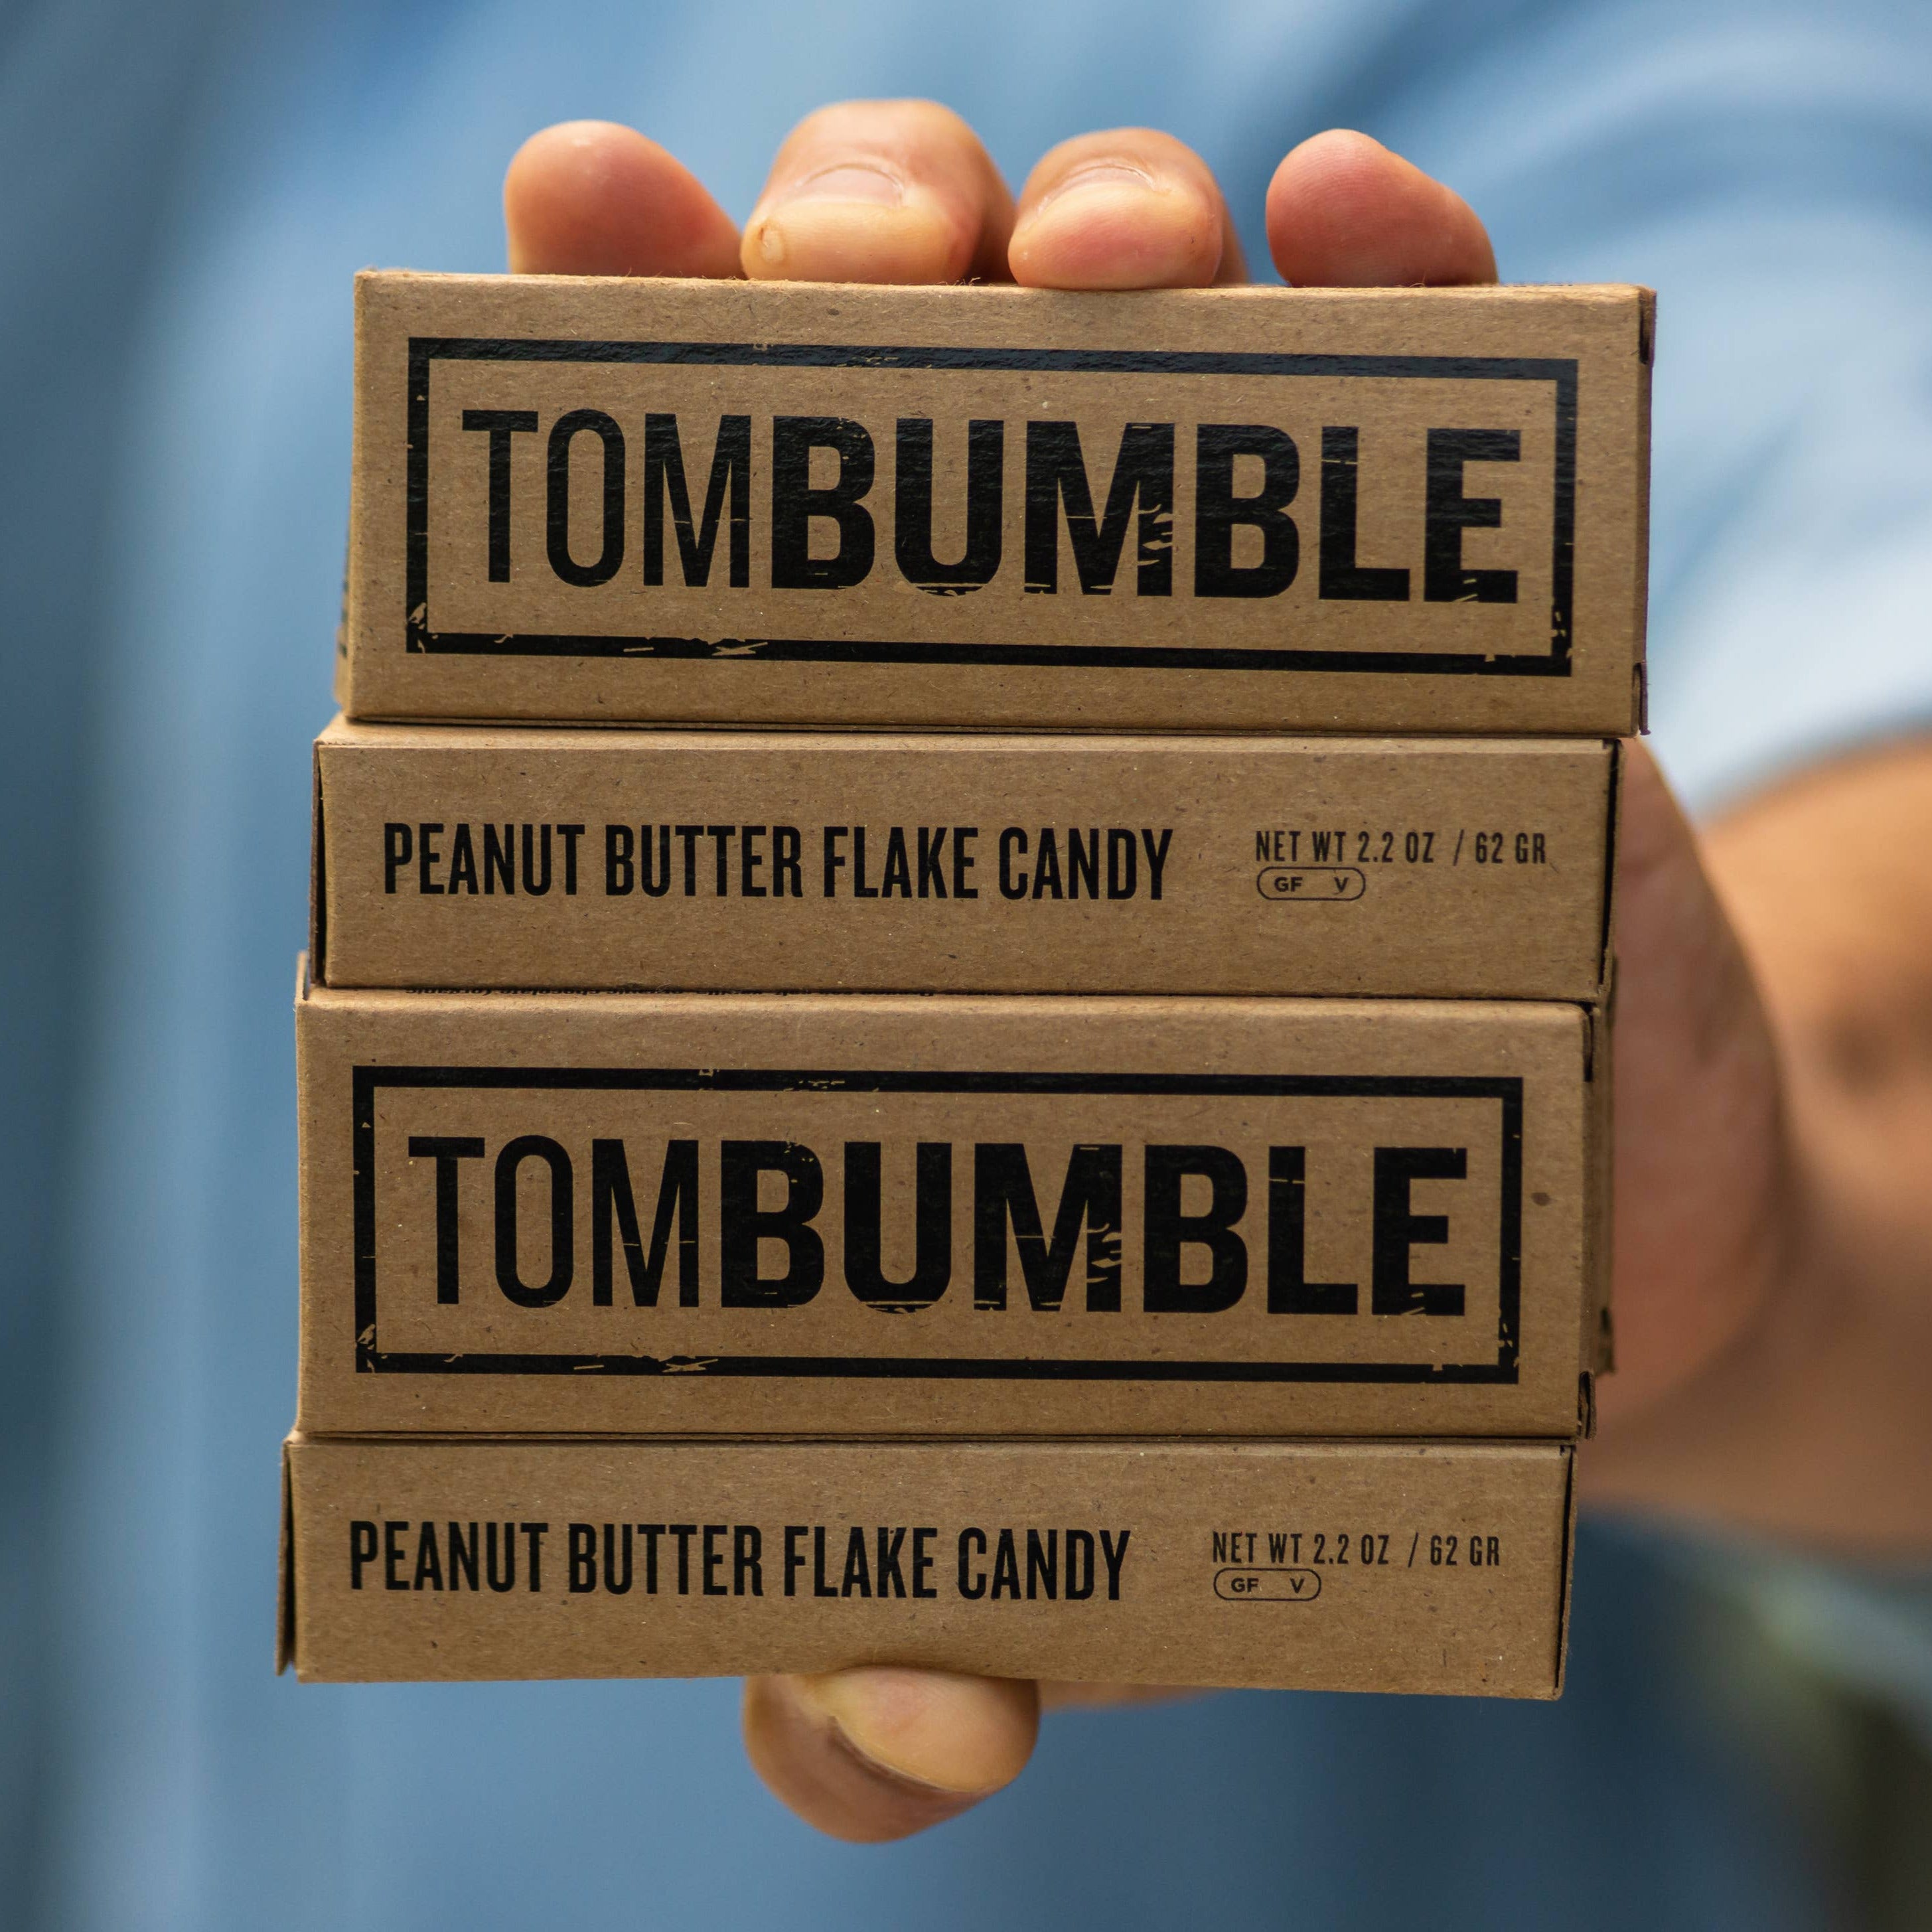 Tom Bumble Candy Bar - Pack of 2